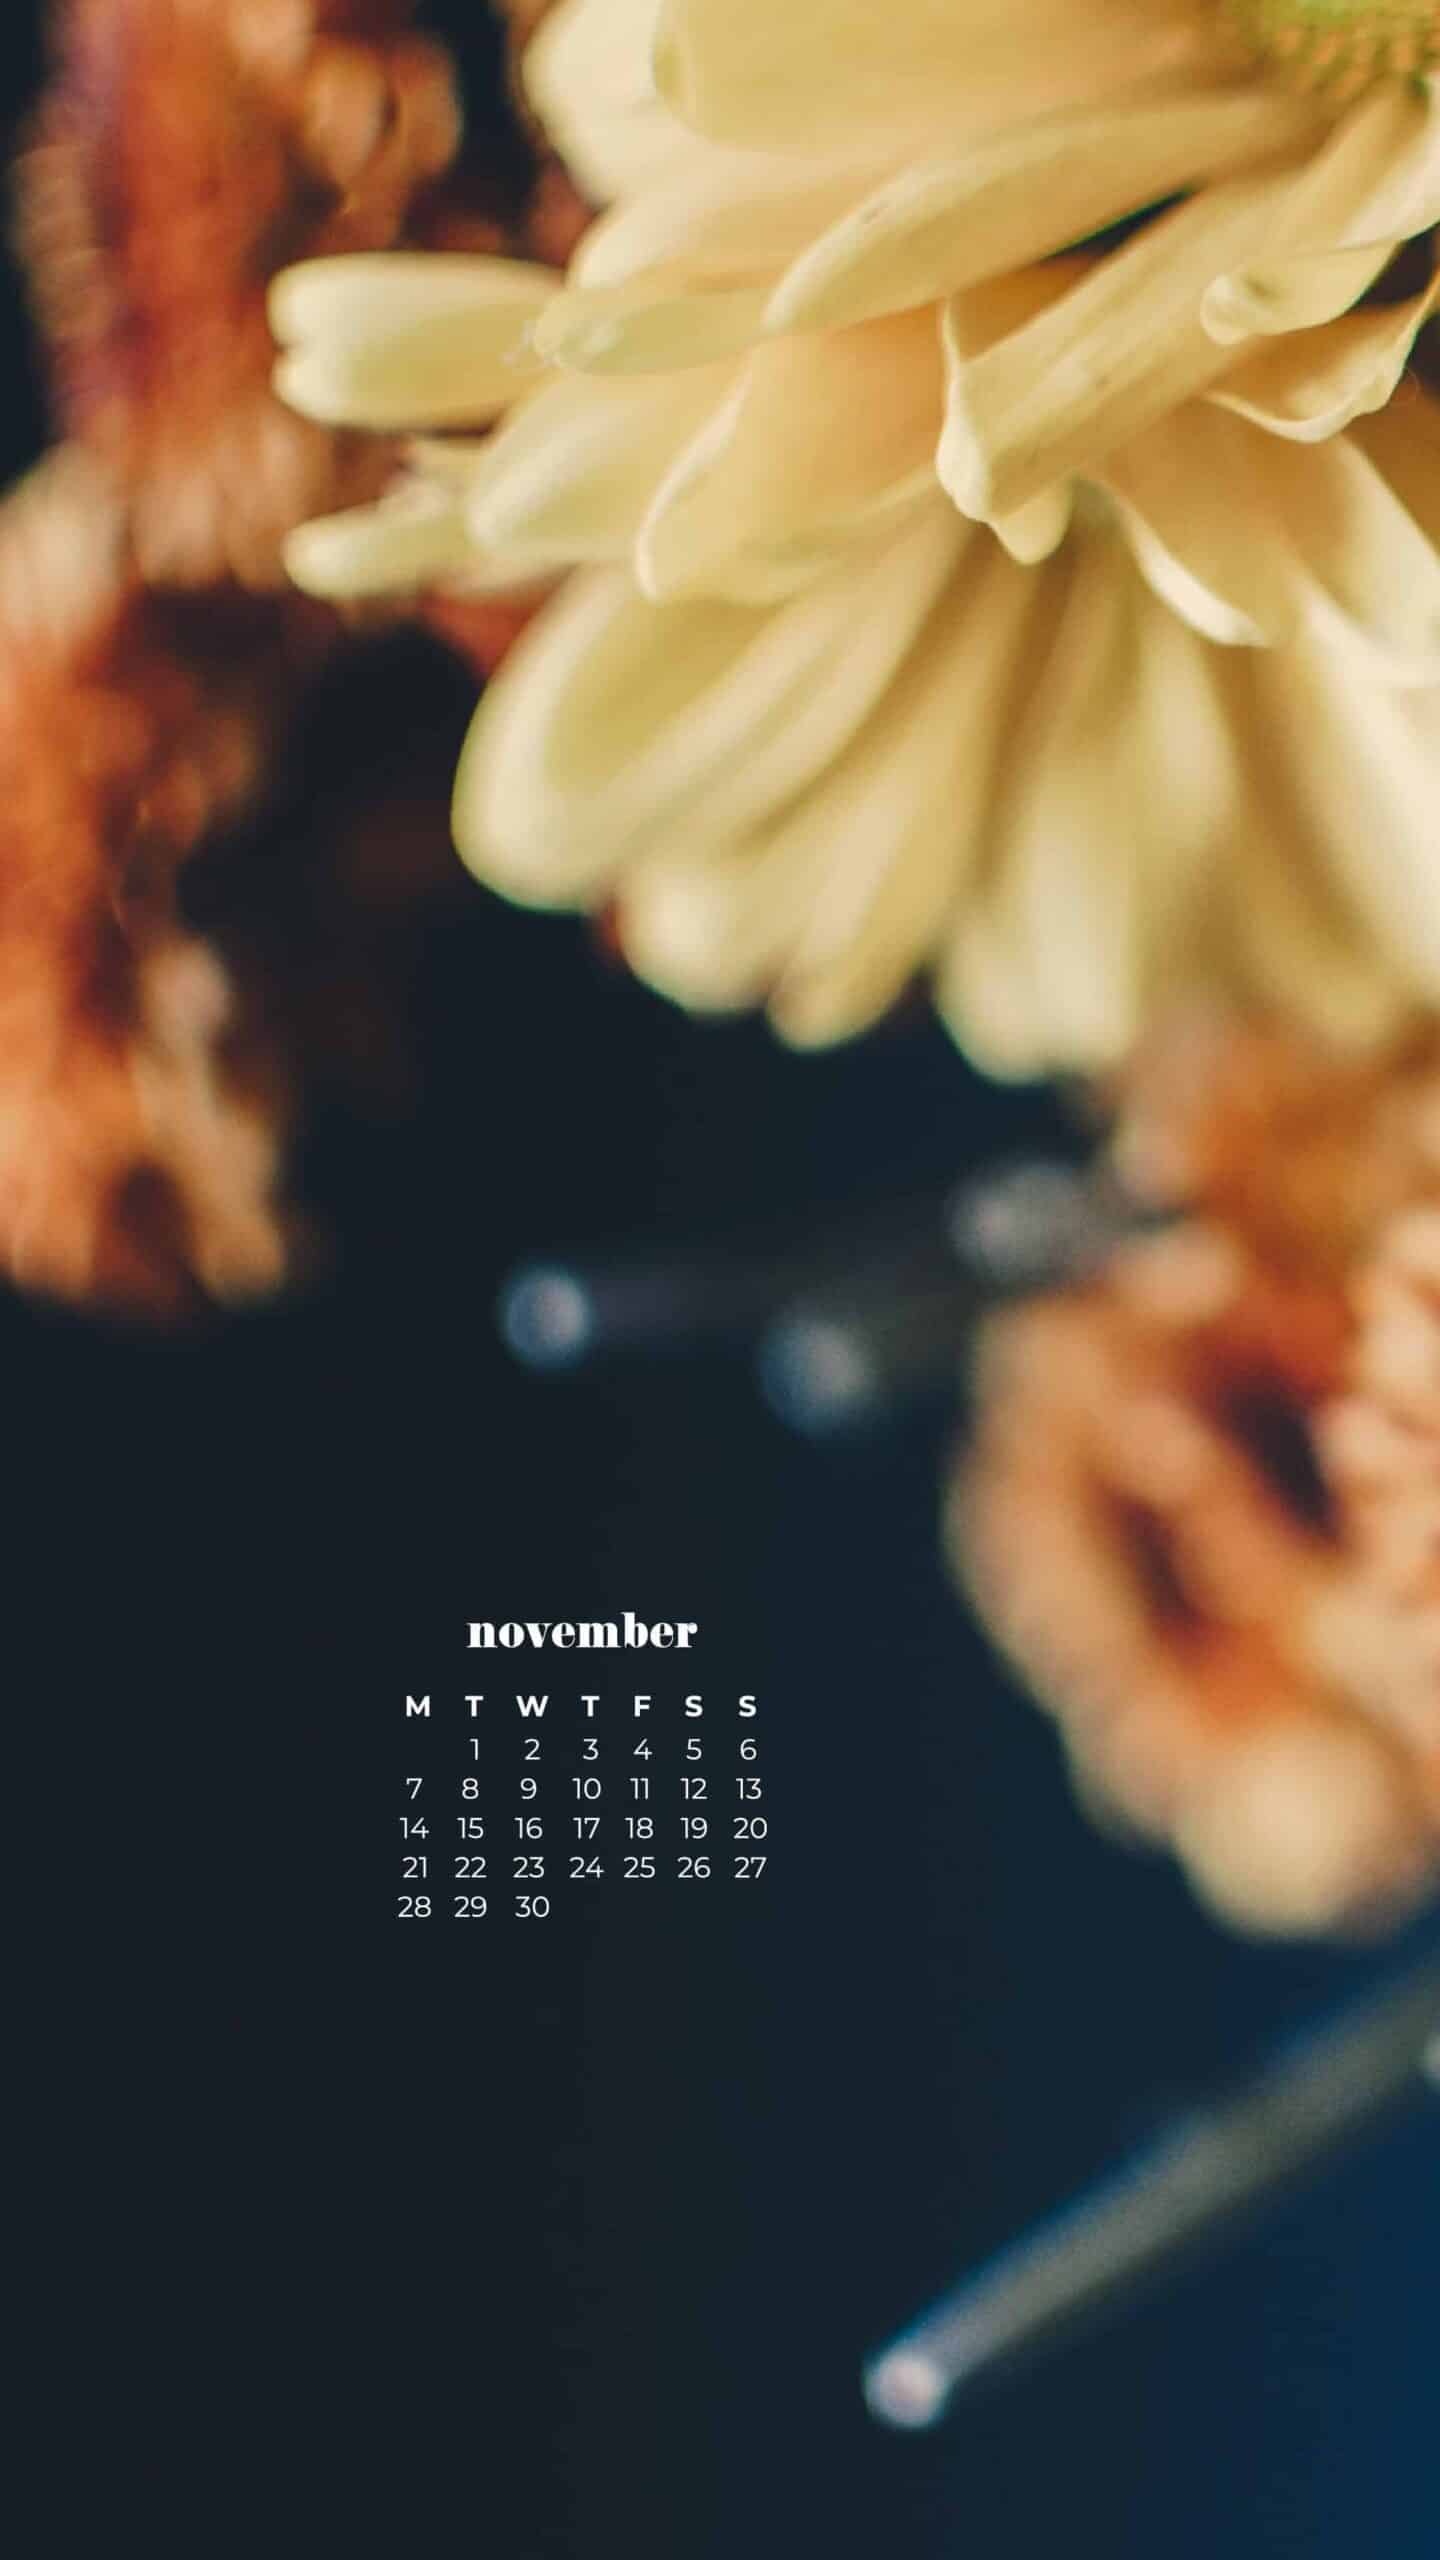 beautiful and colorful fall flowers with a vintage feel on navy backgrund November 2022 wallpapers – FREE calendars in Sunday & Monday starts + no-calendar designs. 59 beautiful options for desktop & smart phones!